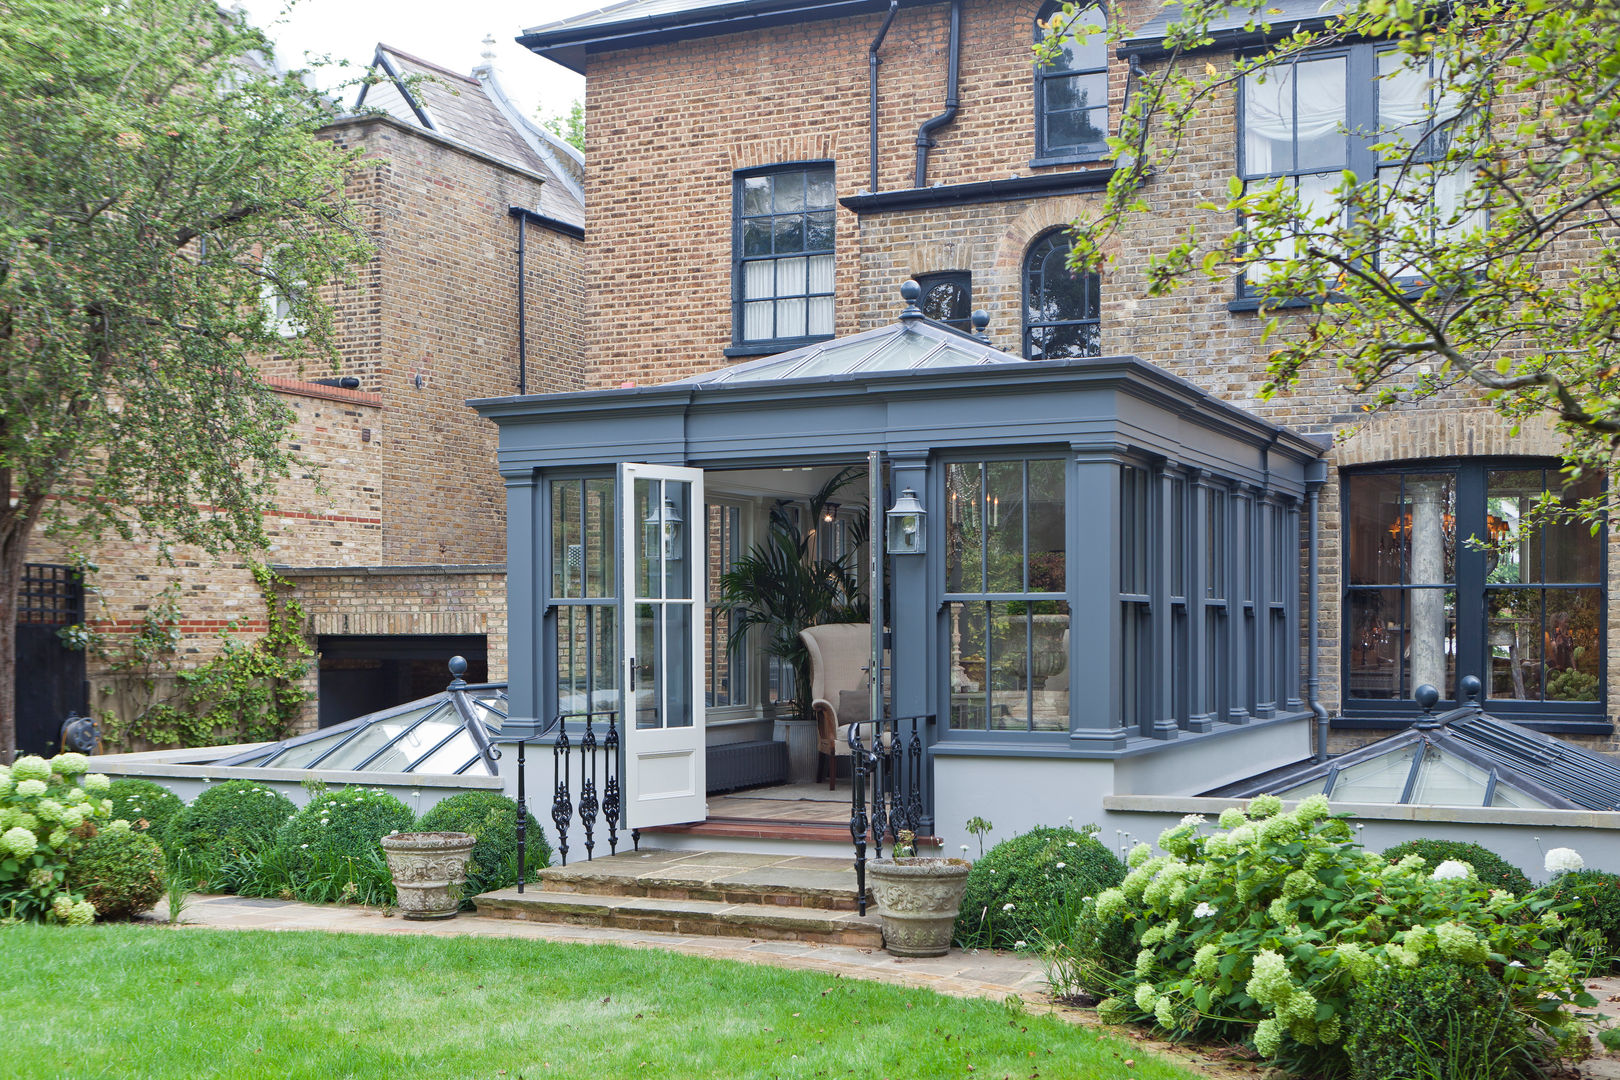 Dual Level Orangery and Rooflights Transform a London Townhouse Vale Garden Houses بيت زجاجي